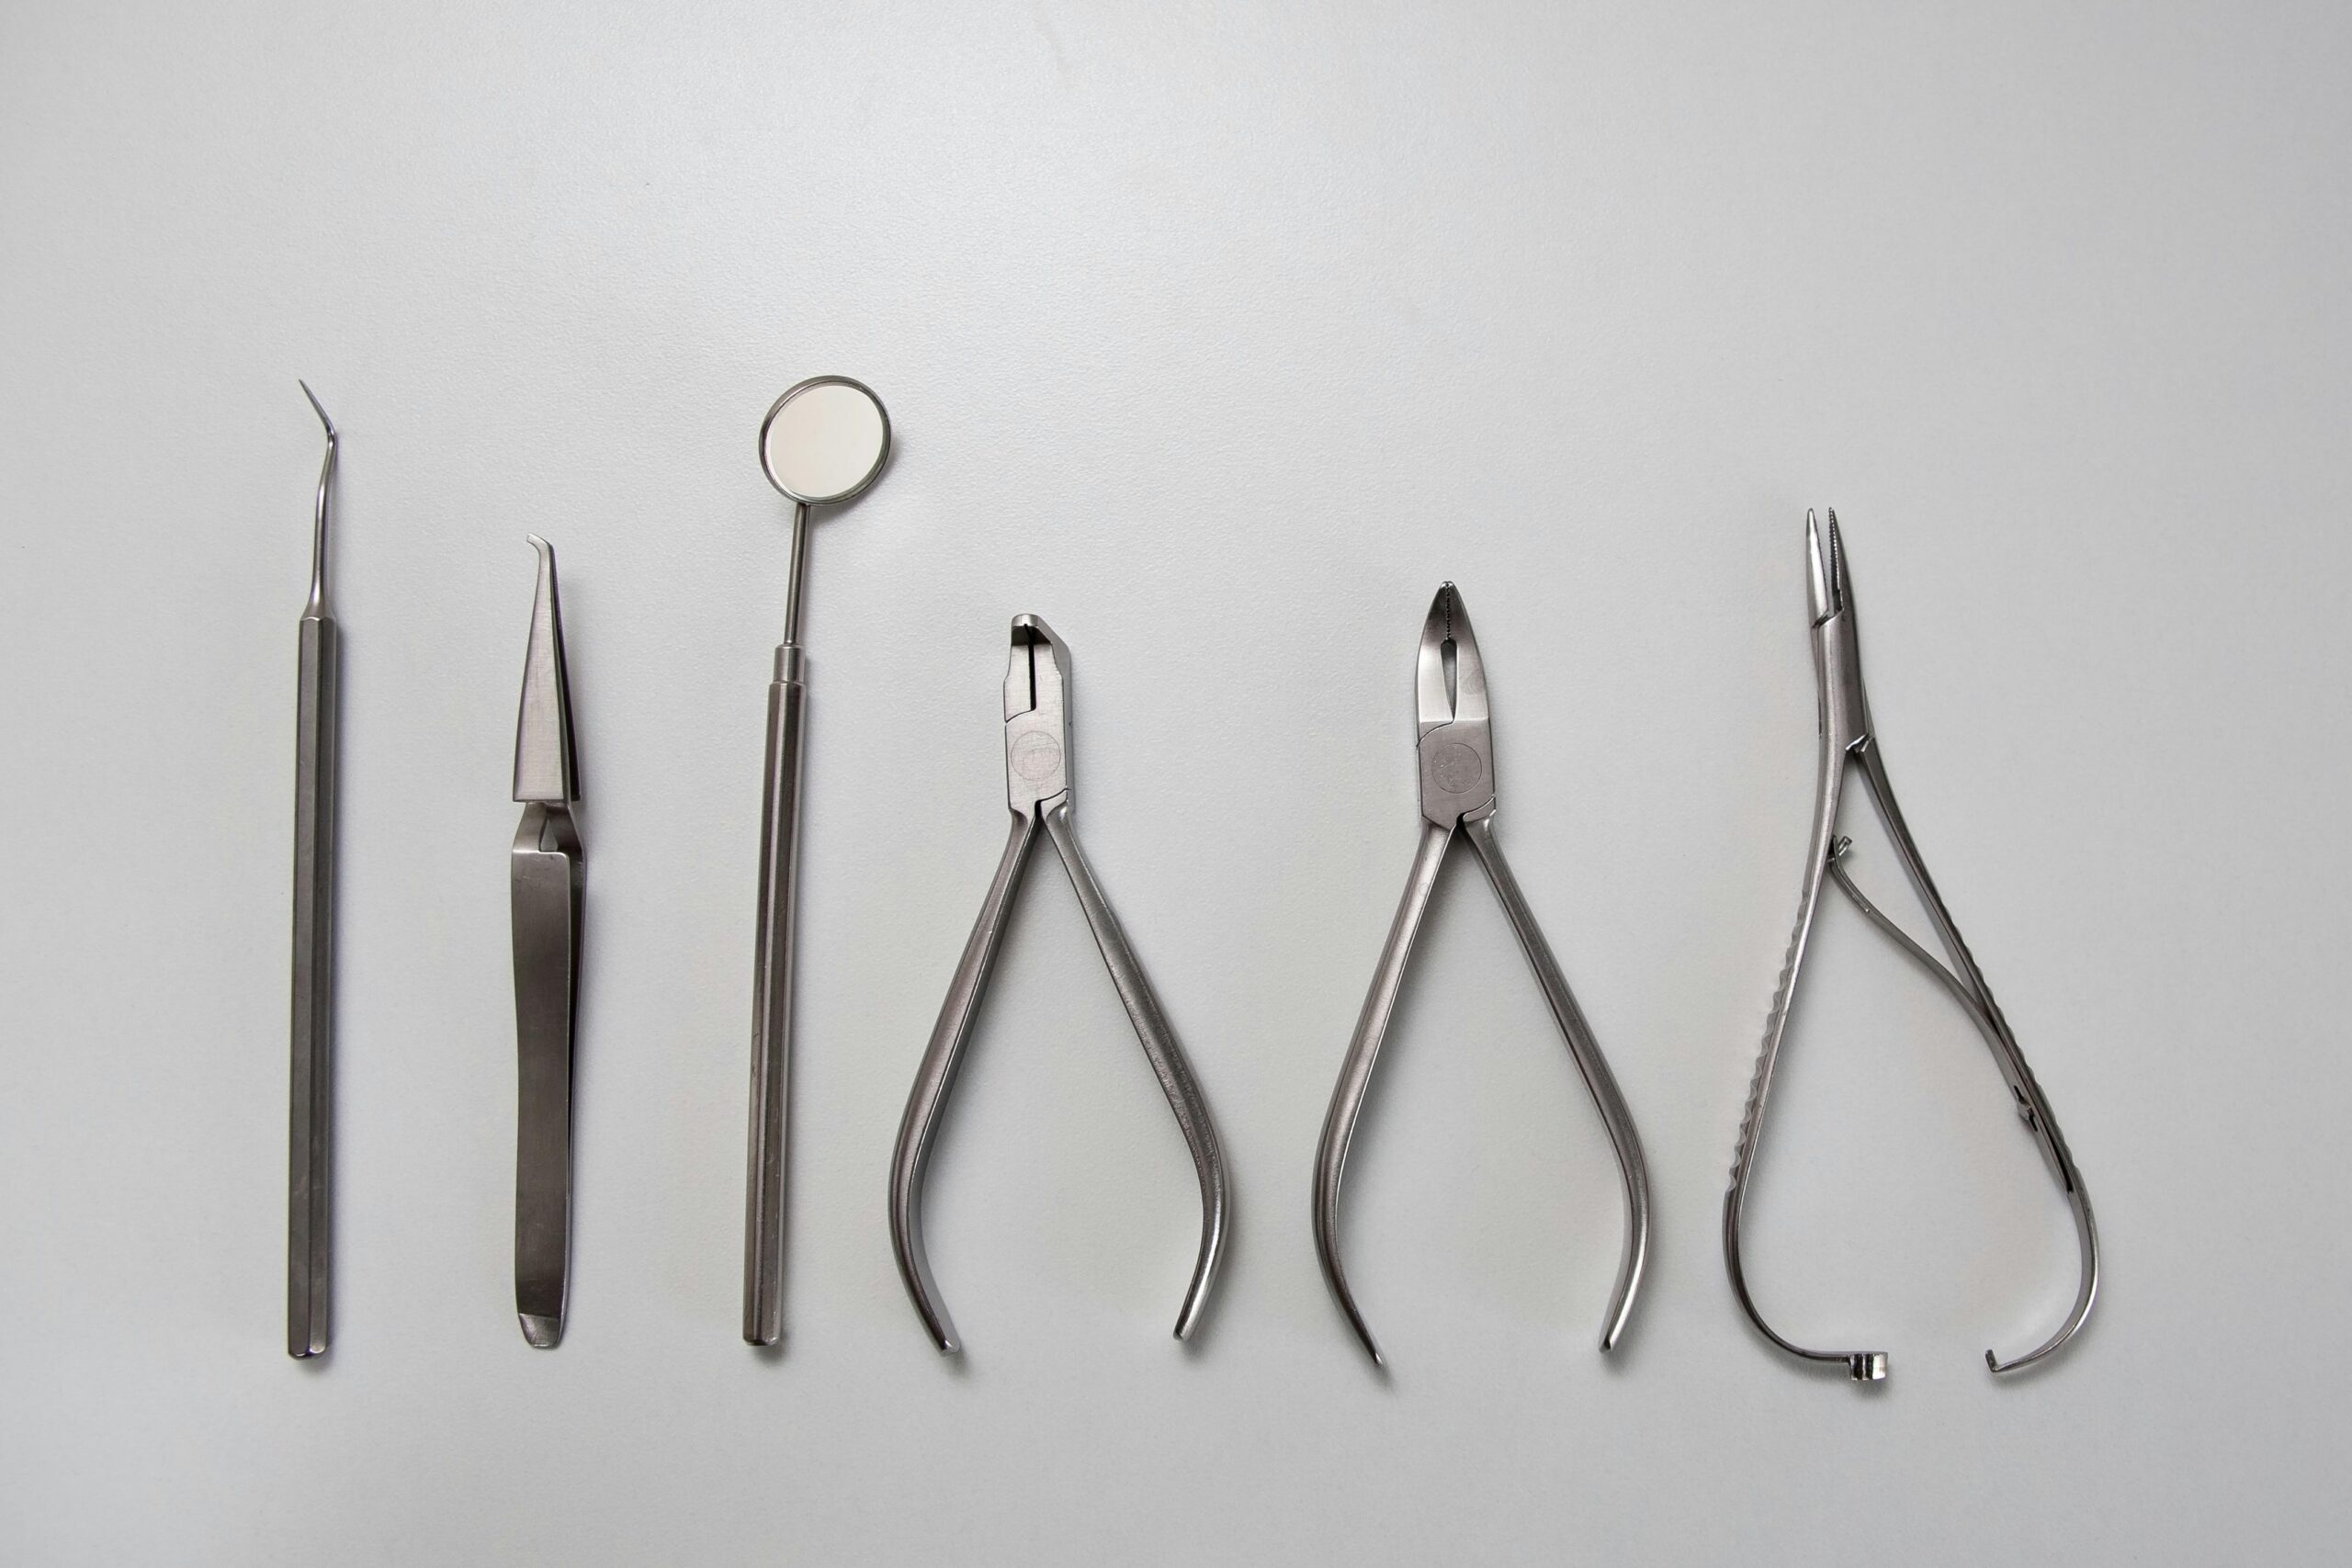 A collection of dental instruments used for oral surgery